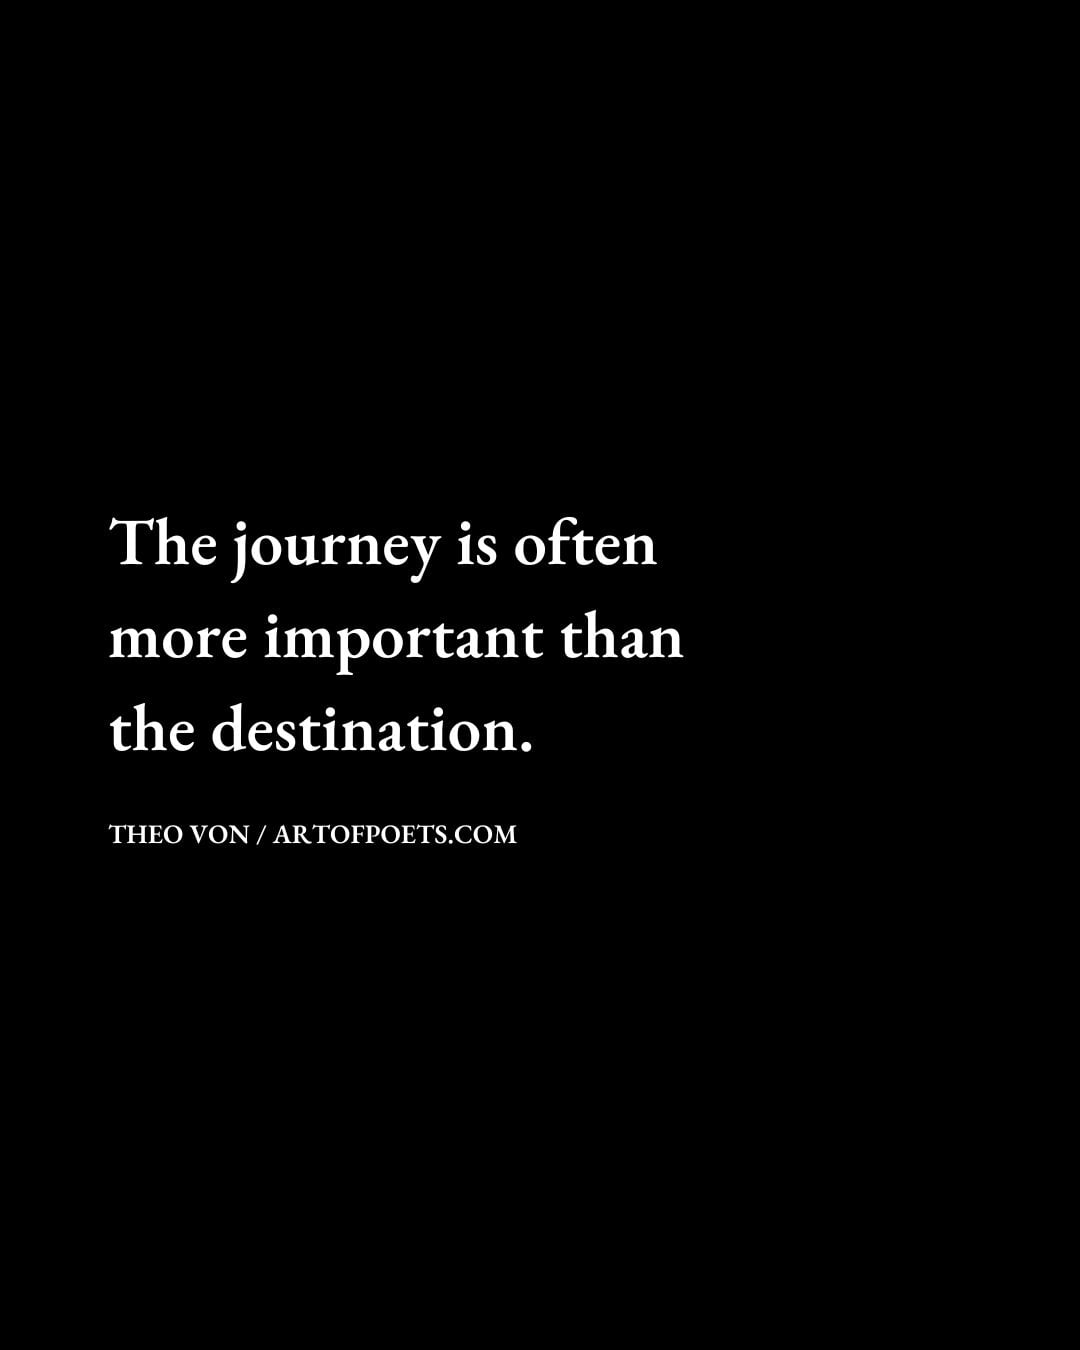 The journey is often more important than the destination